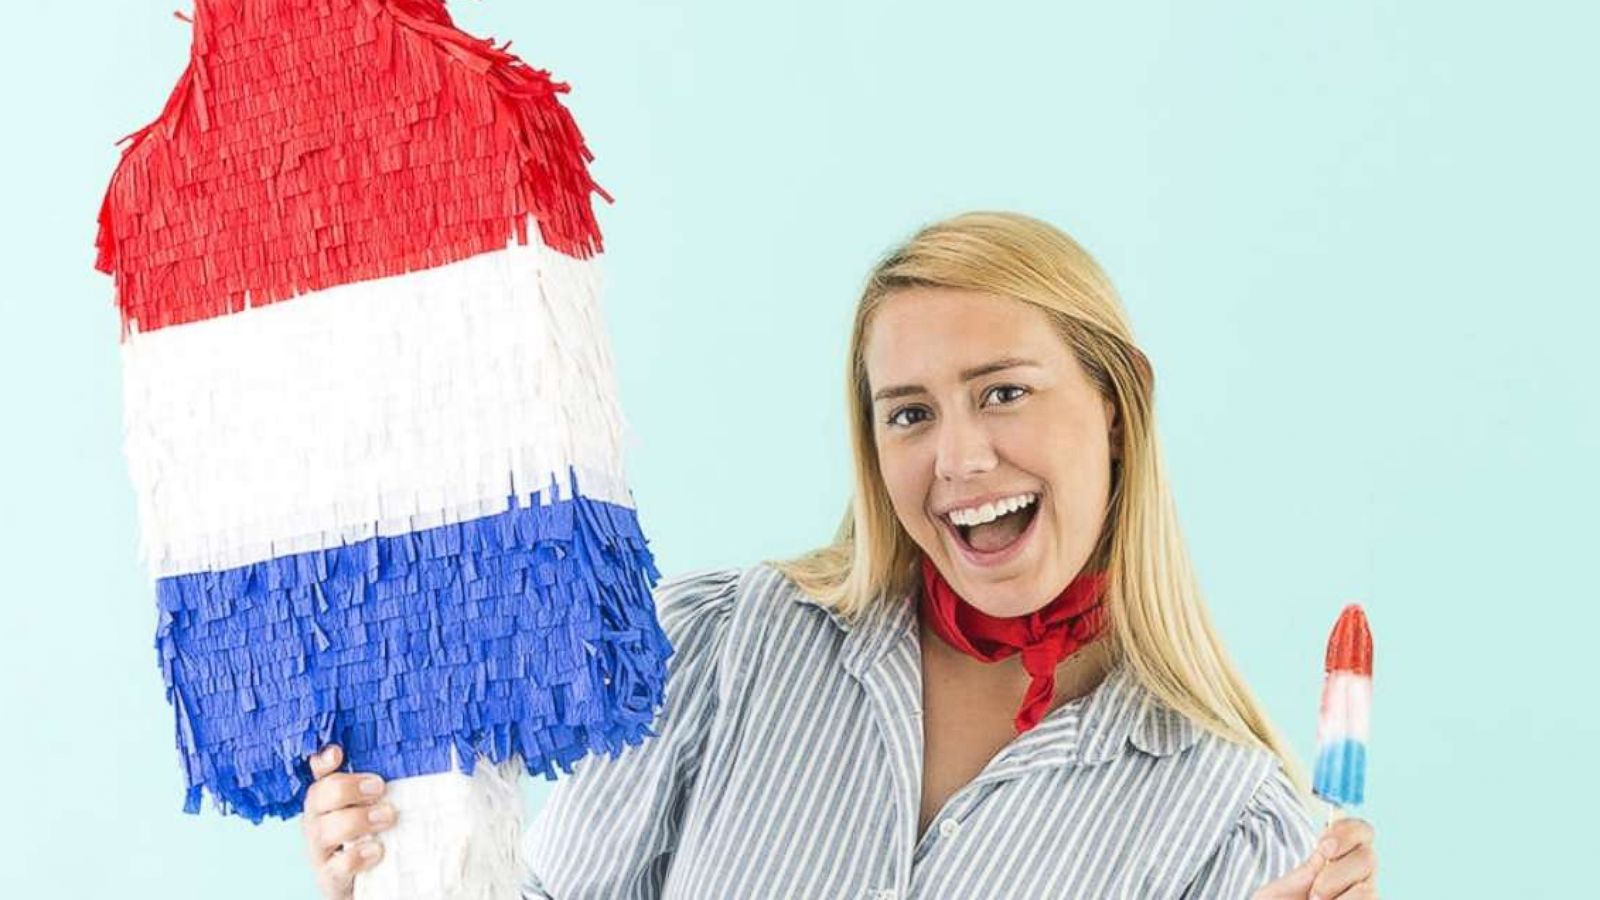 PHOTO: Brit + Co shares a step-by-step guide on how to make a DIY Fourth of July pinata.